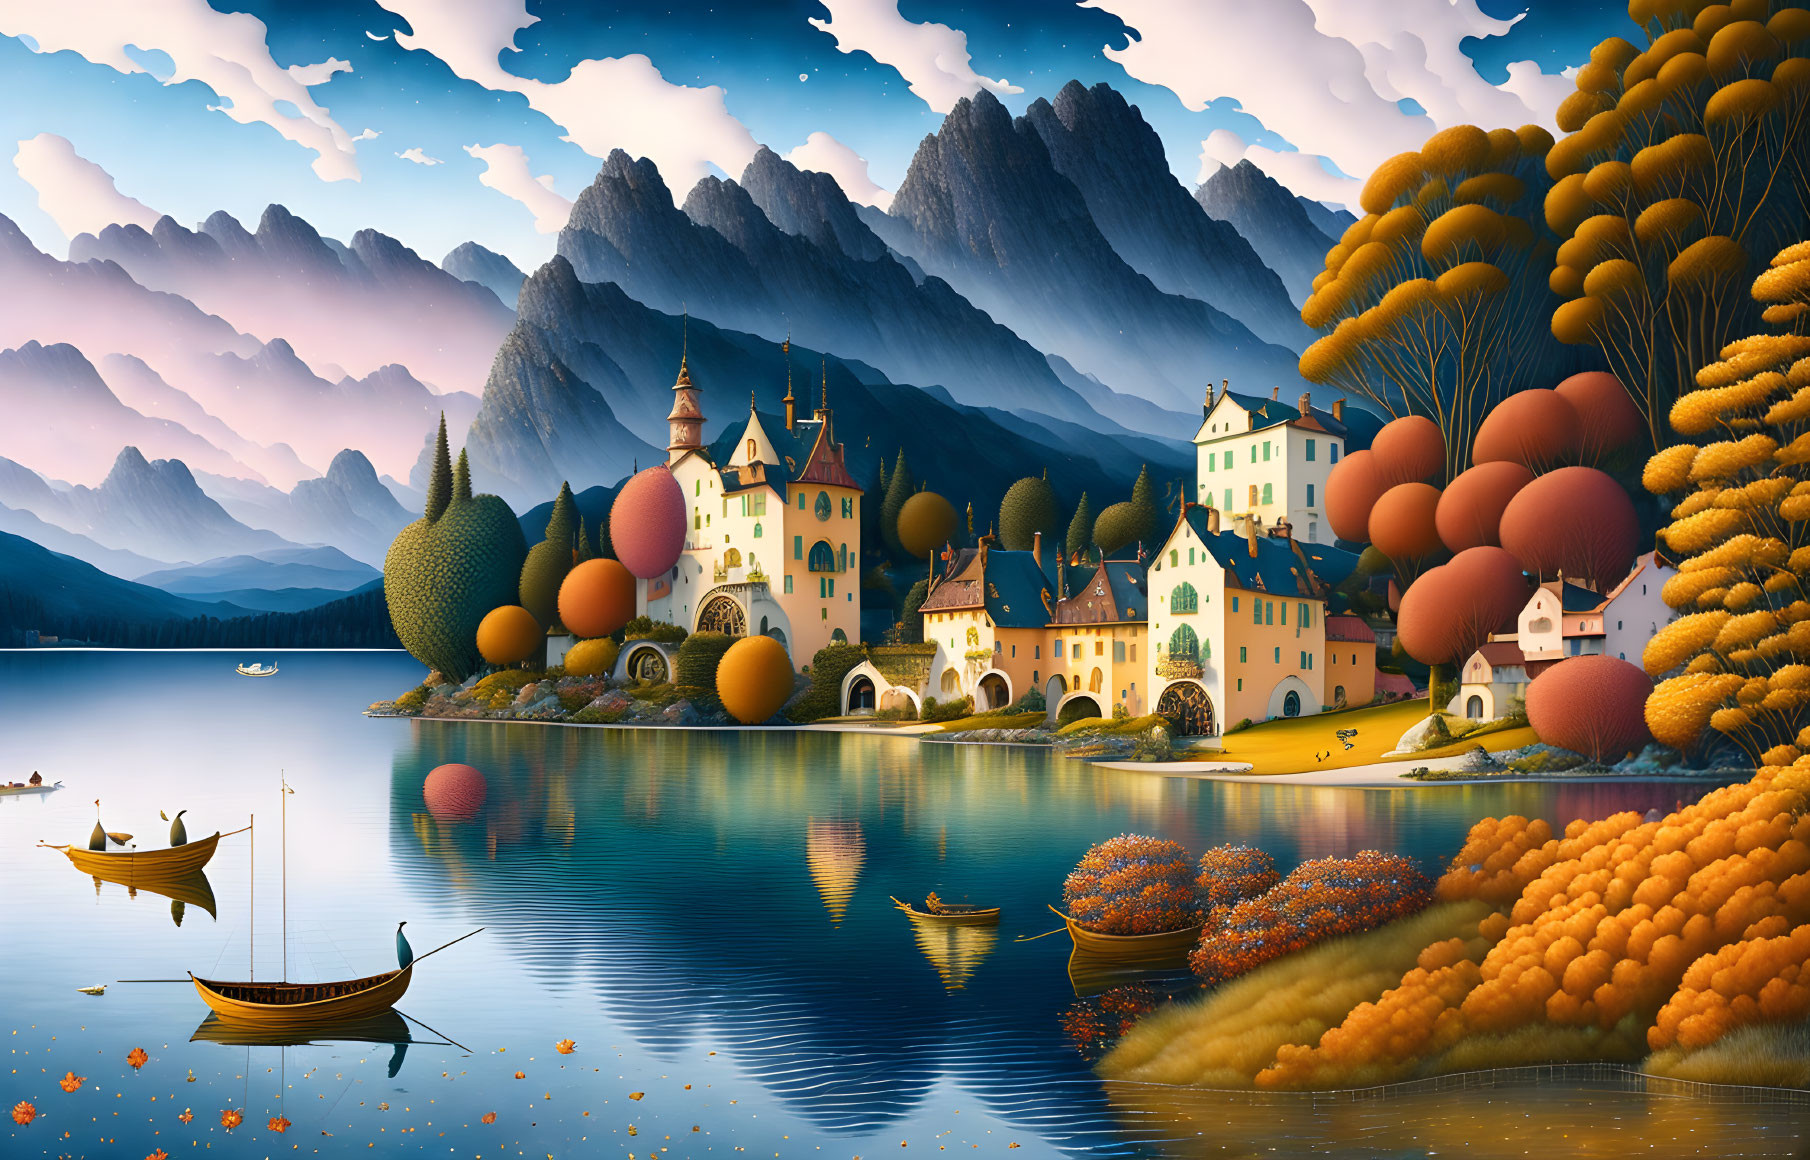 Tranquil village scene with lake, boats, and autumn trees